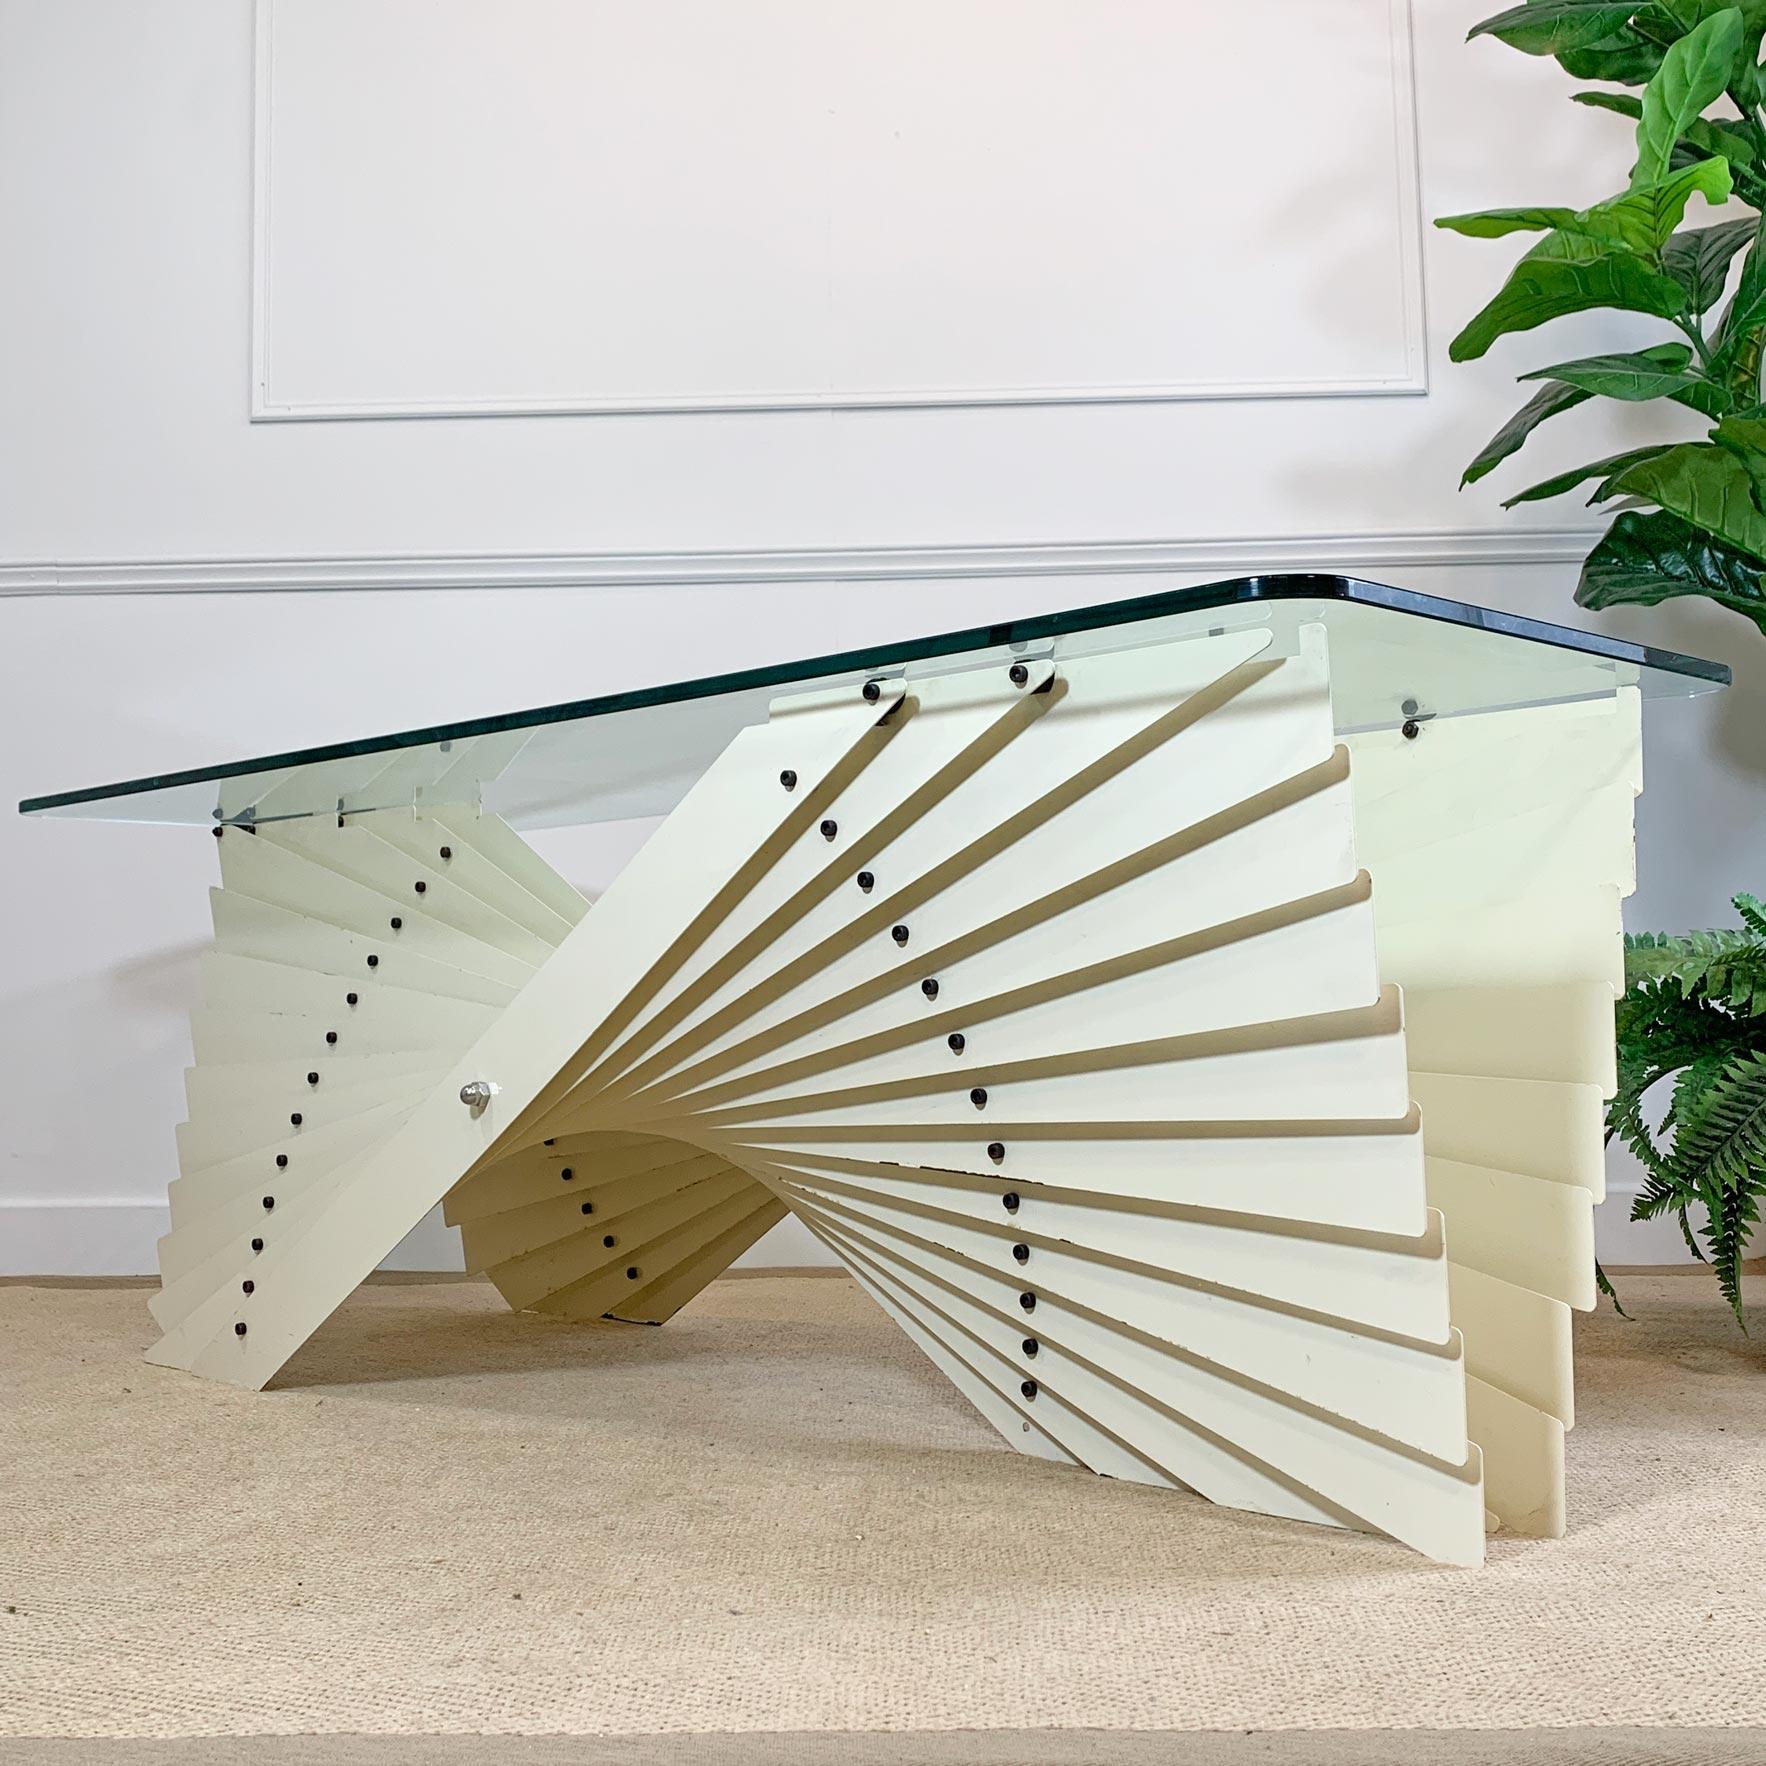 An exceptional Italian designer coffee table from the late 1970’s. This extremely rare table is made from individual steel slats, each painted in an off white palette, and arranged to form the stunning free flowing sculptural fan form which changes